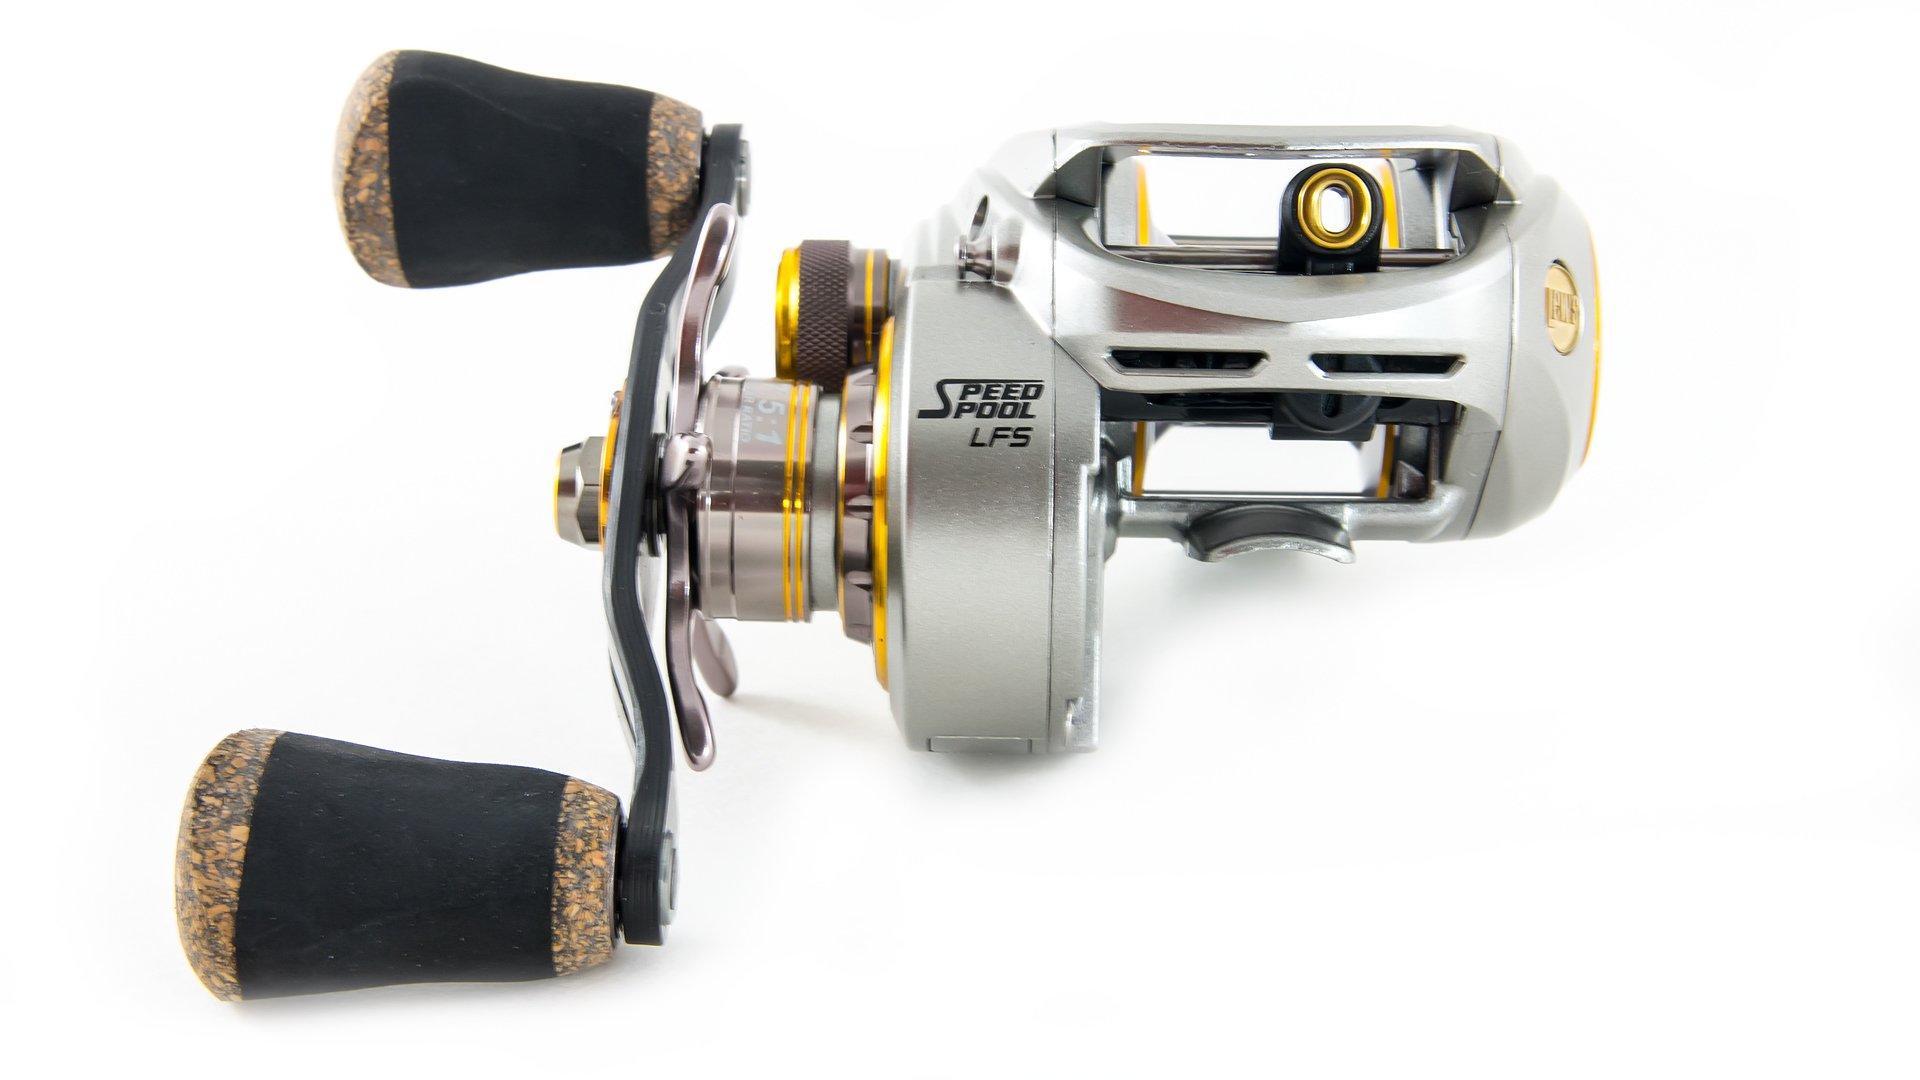 Review on a budget lews lite speed Ls75 speed spinning reel is it